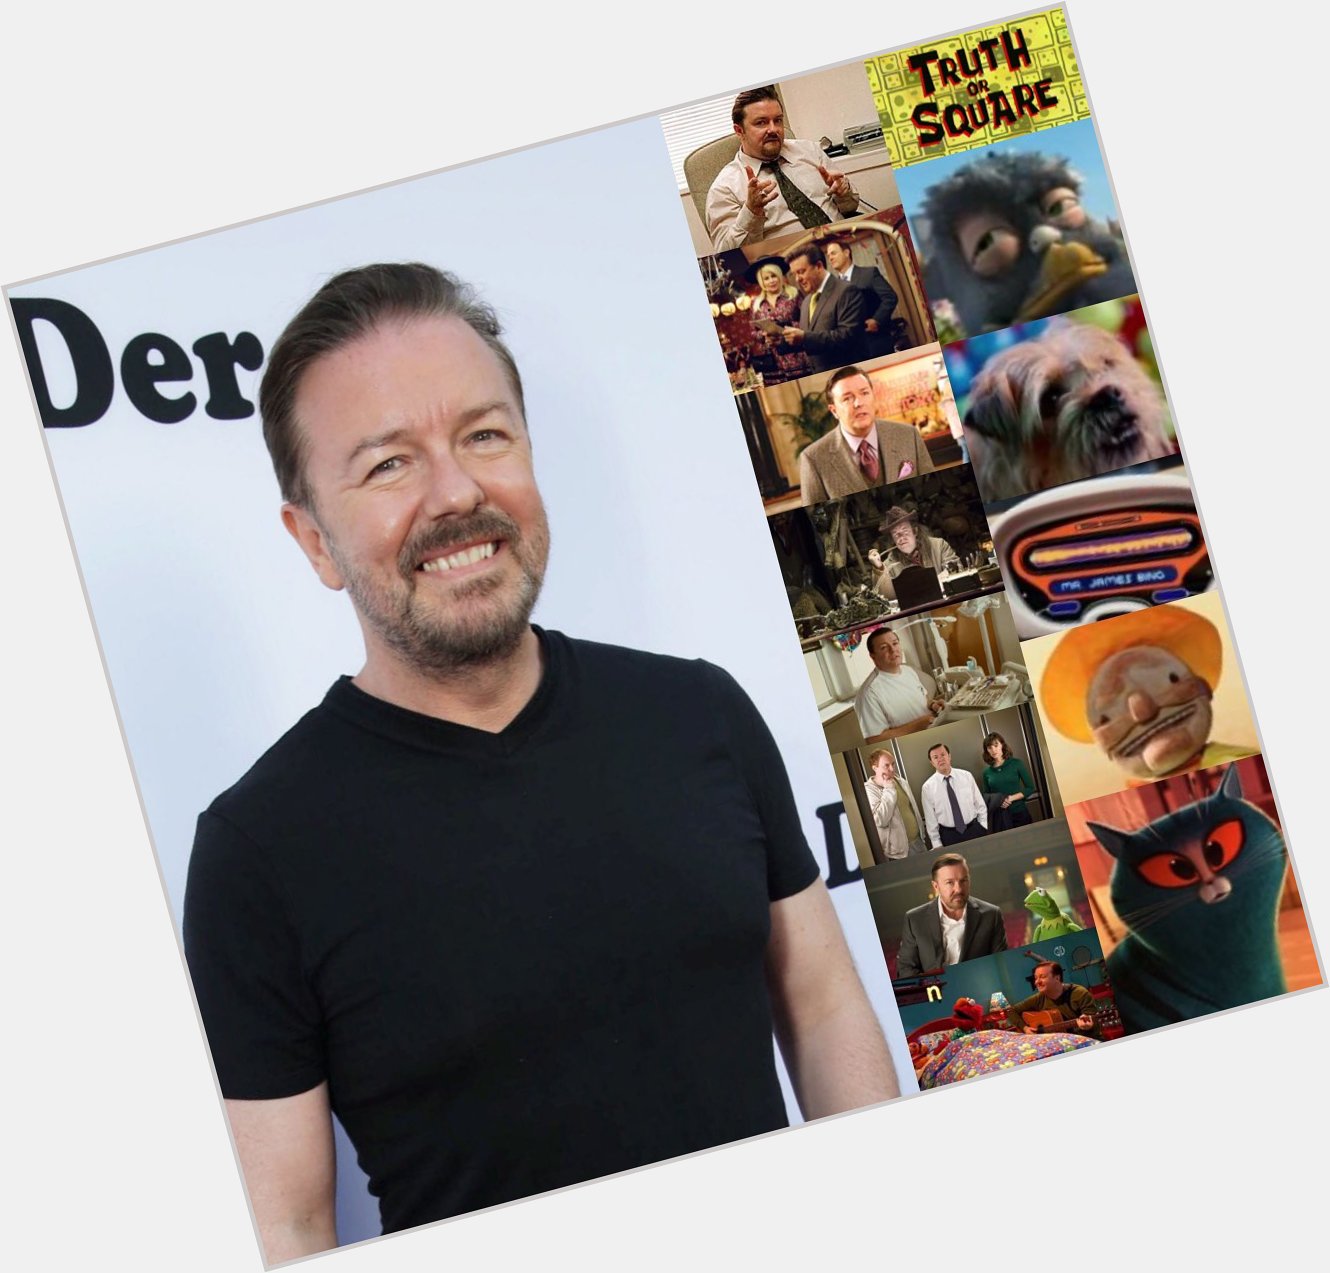 Happy 59th Birthday to Ricky Gervais! 